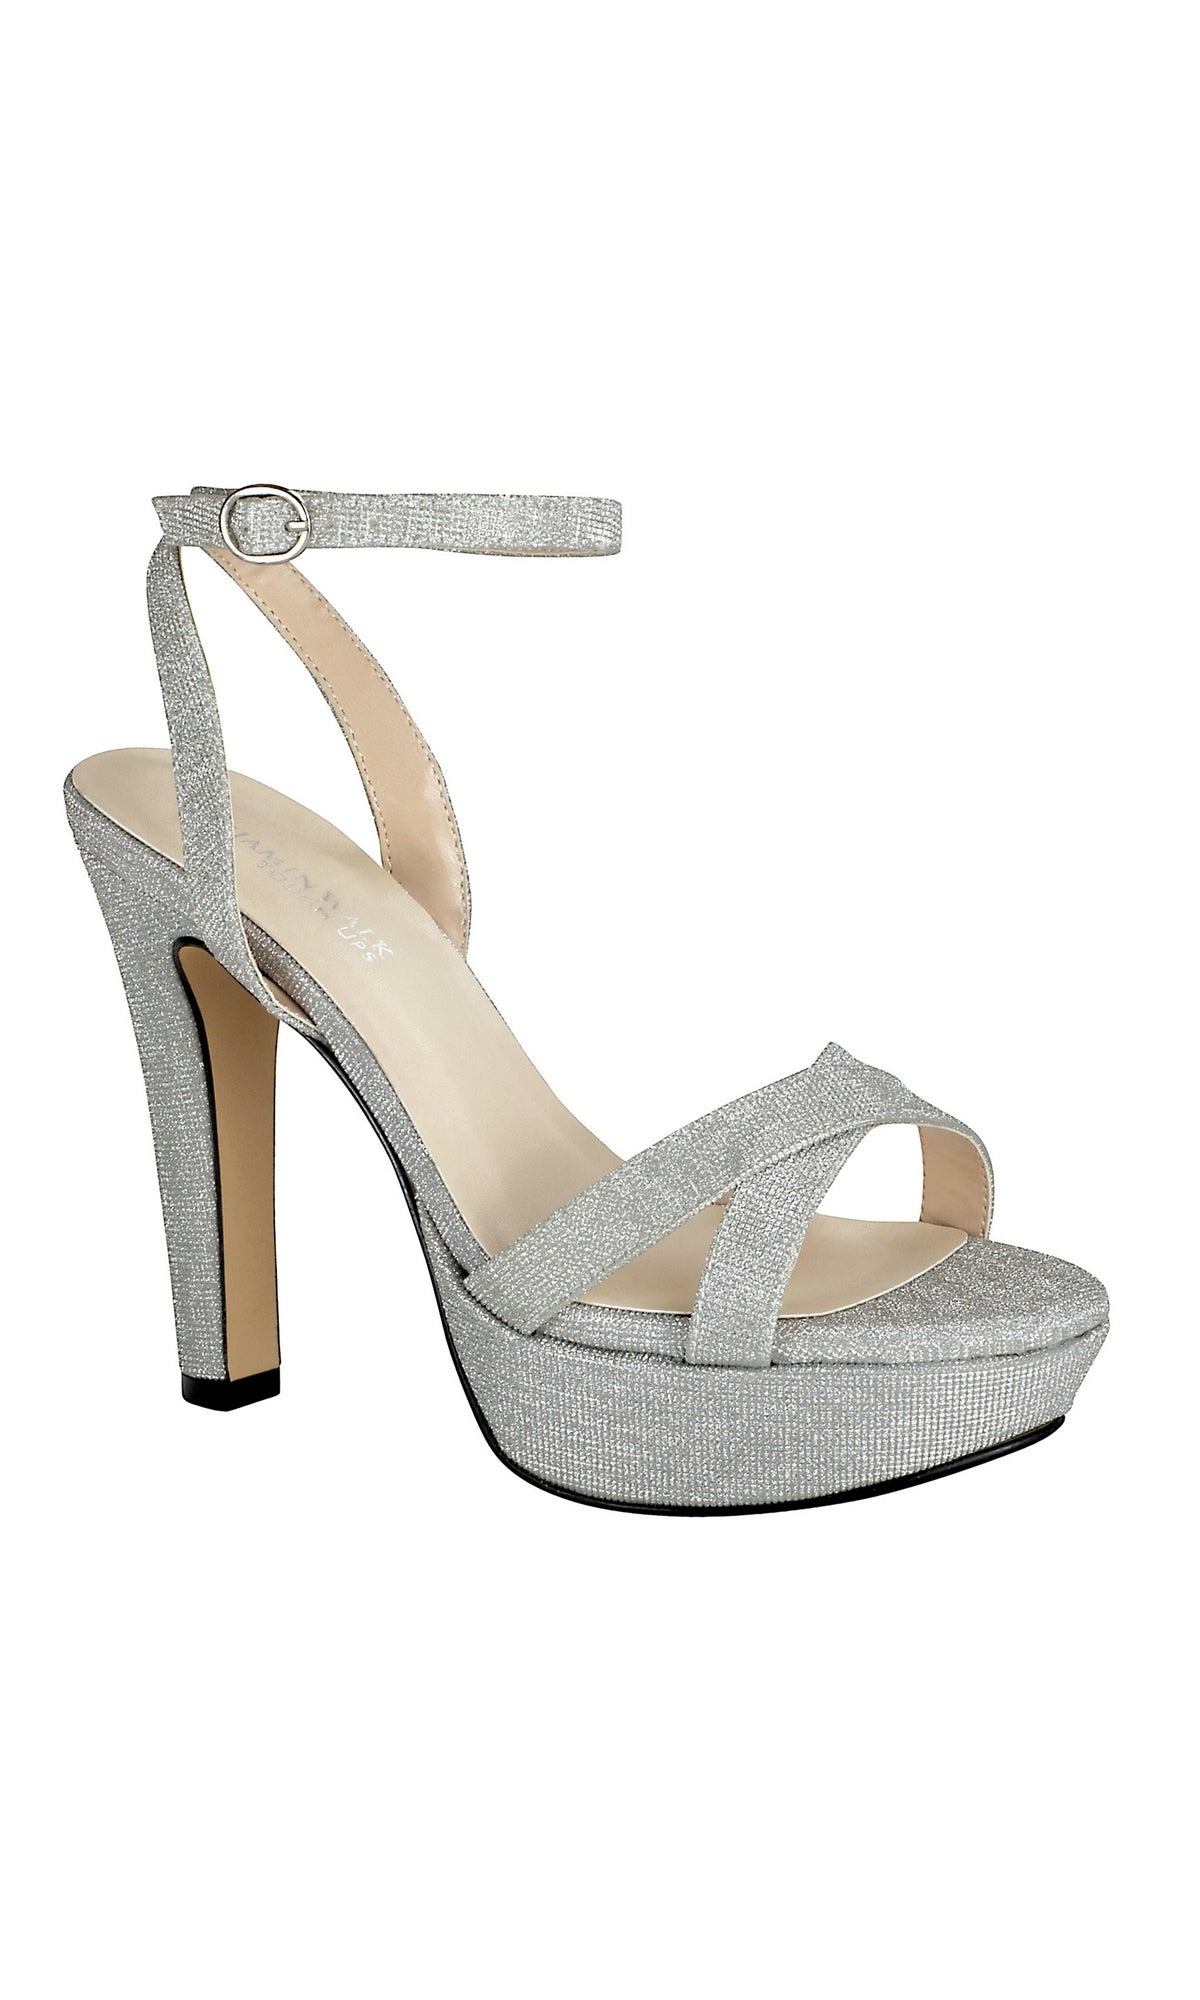 Taylor Silver Ankle Strap Heels | Silver ankle strap heels, Heels, Silver  high heels